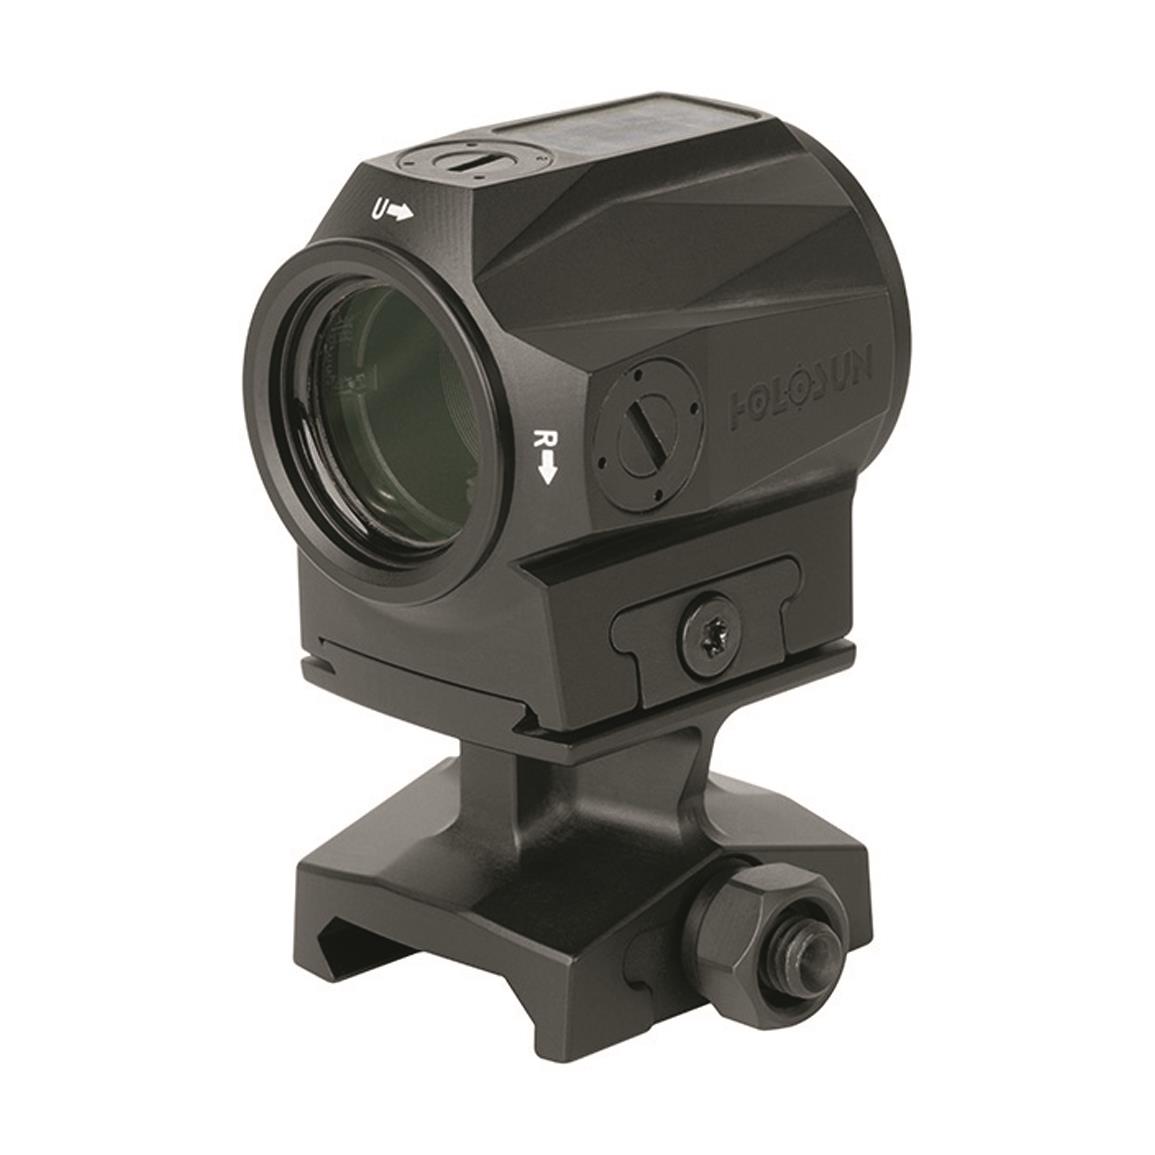 Aimpoint Micro H-2 Red Dot Reflex Sight with Standard Mount - 2 MOA -  200185 : Sports & Outdoors 